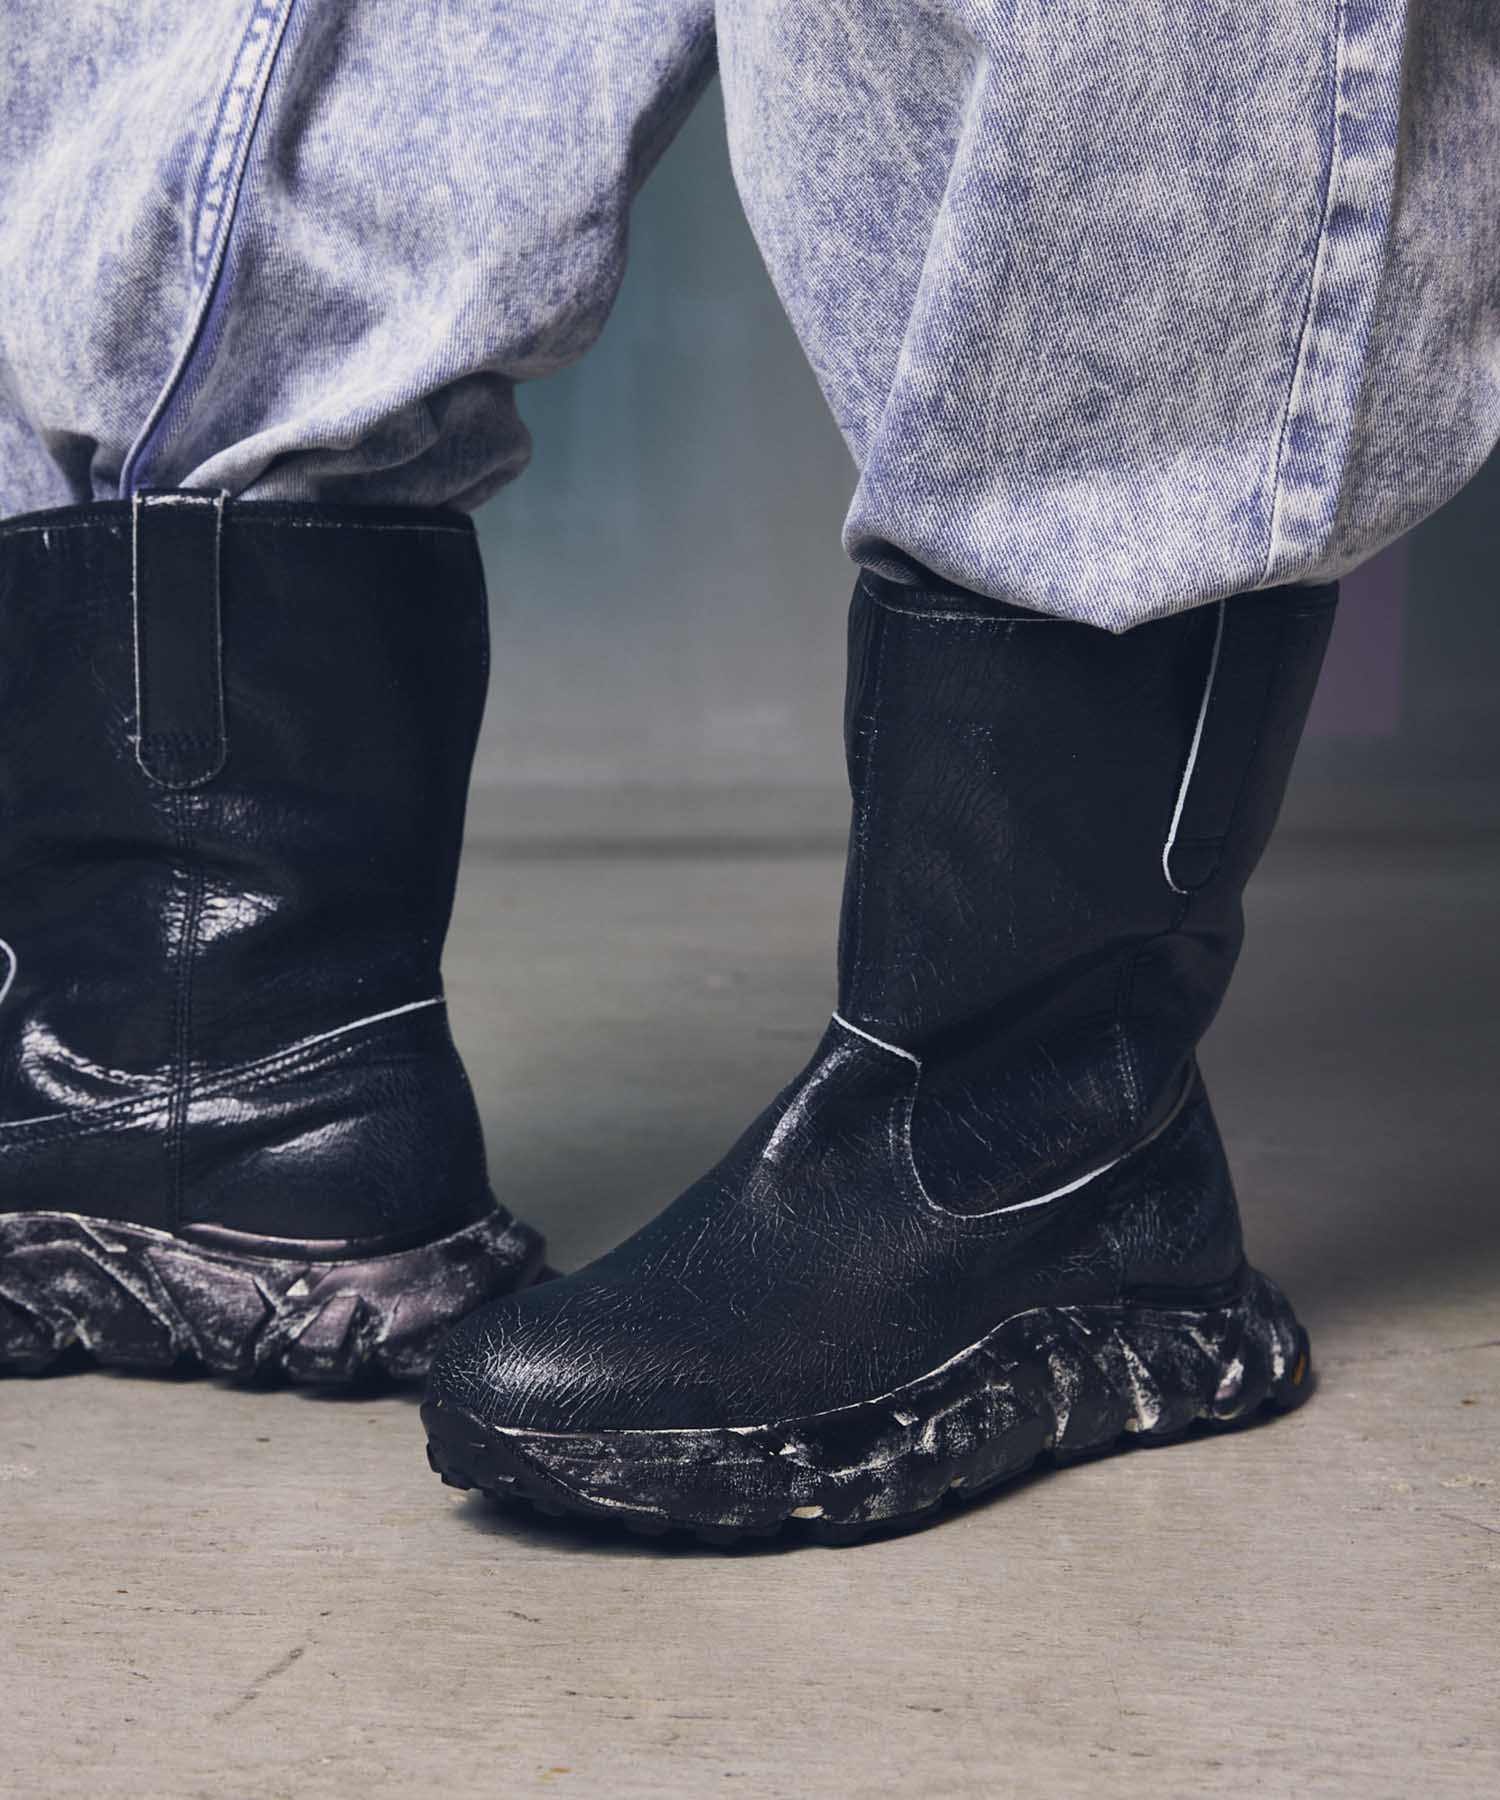 【SPECIAL SHOES FACTORY COLLABORATION】Vibram Sole Pecos Boots Made In TOKYO